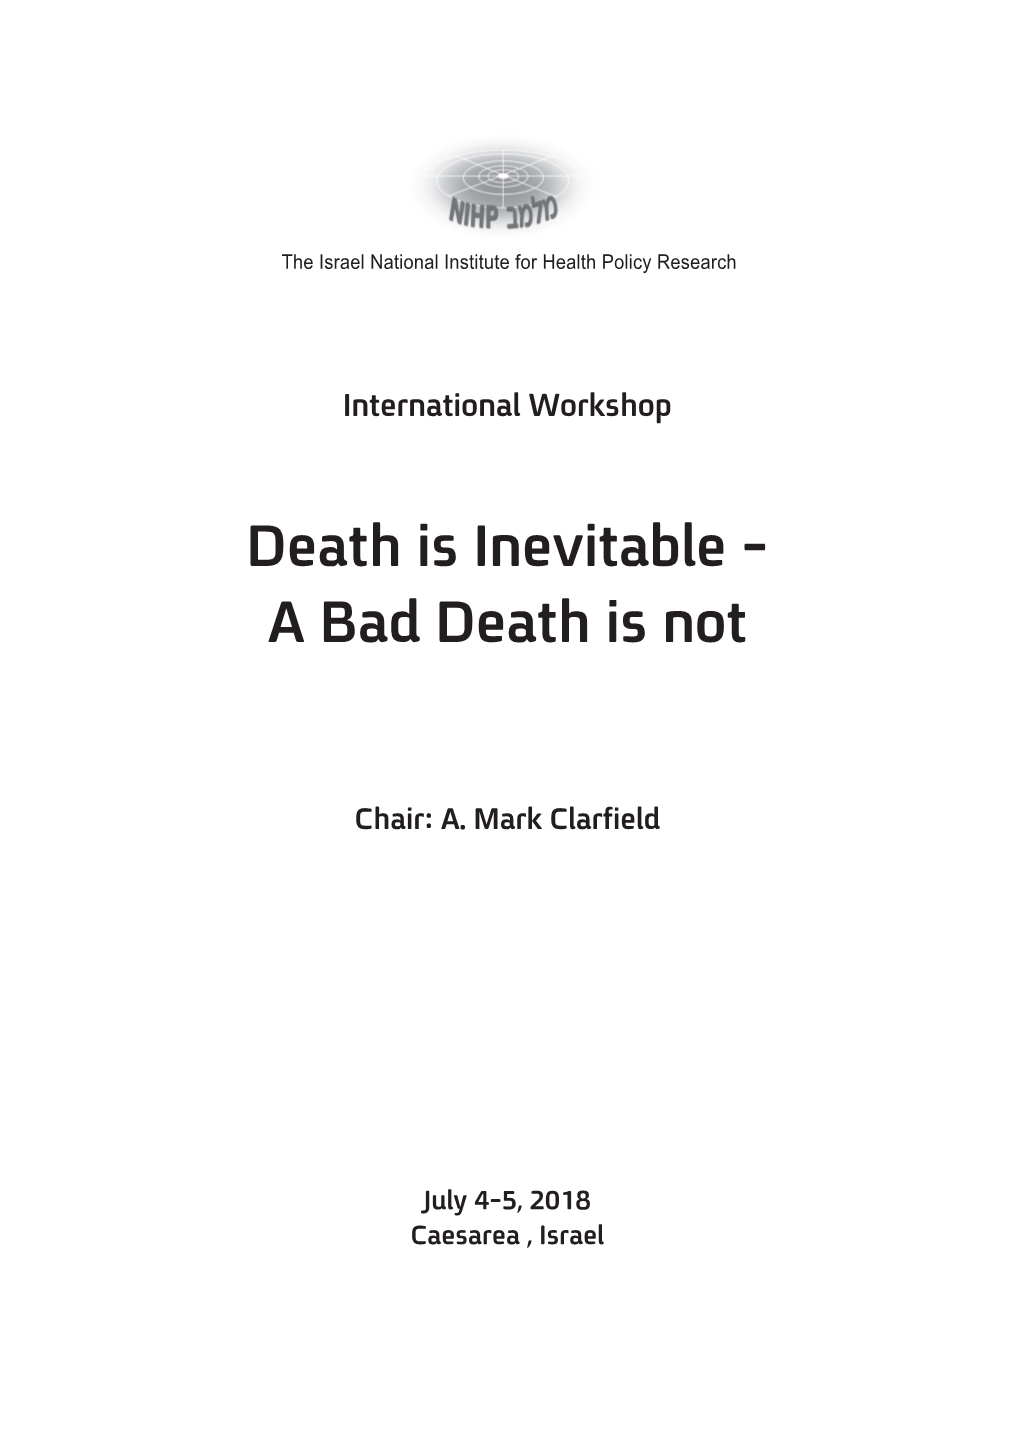 Death Is Inevitable - a Bad Death Is Not